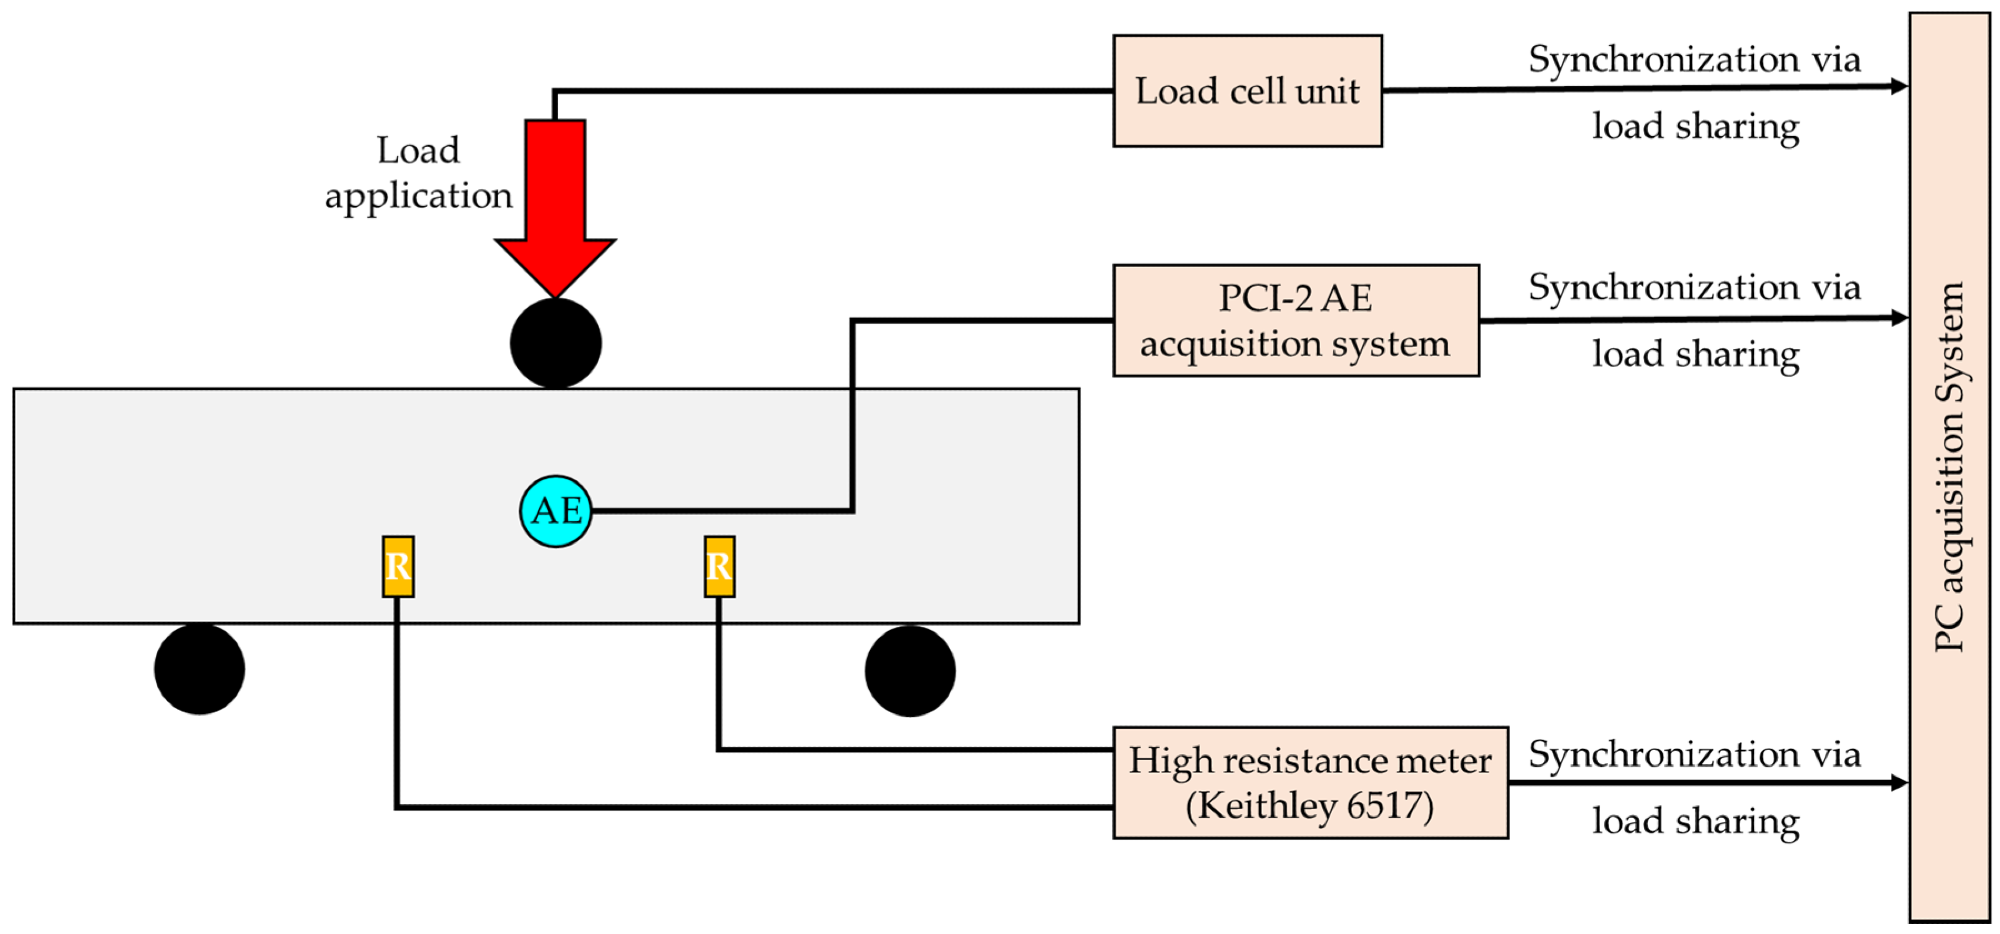 The experimental setup for the concurrent recordings of the electrical resistance and the AEs during the presented 3PB tests.